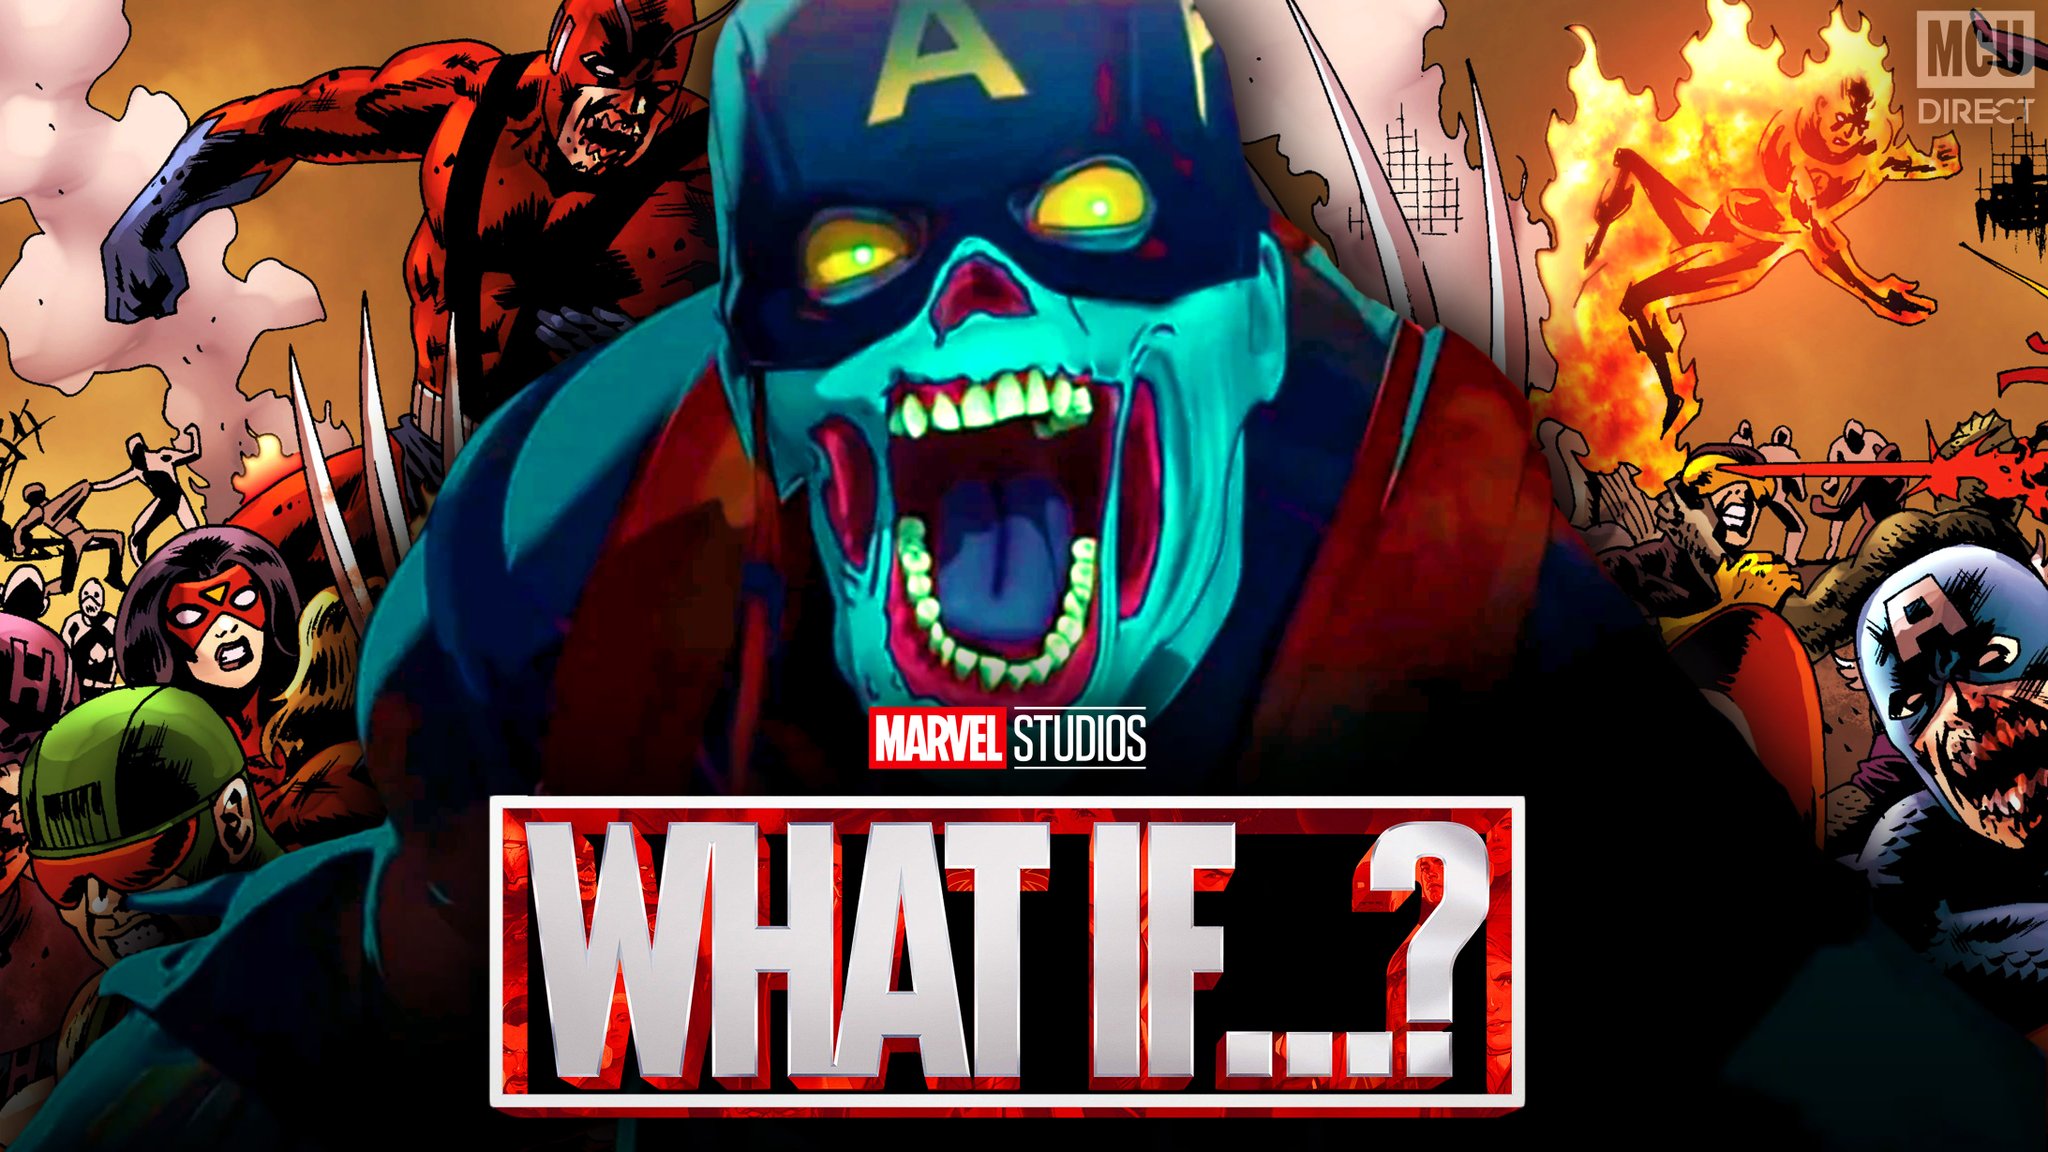 MCU Direct: The First Season Of WHAT IF.? Animated Series Will Reportedly Feature Multiple Zombified Heroes In Addition To Undead Captain America In A Marvel Zombies Inspired